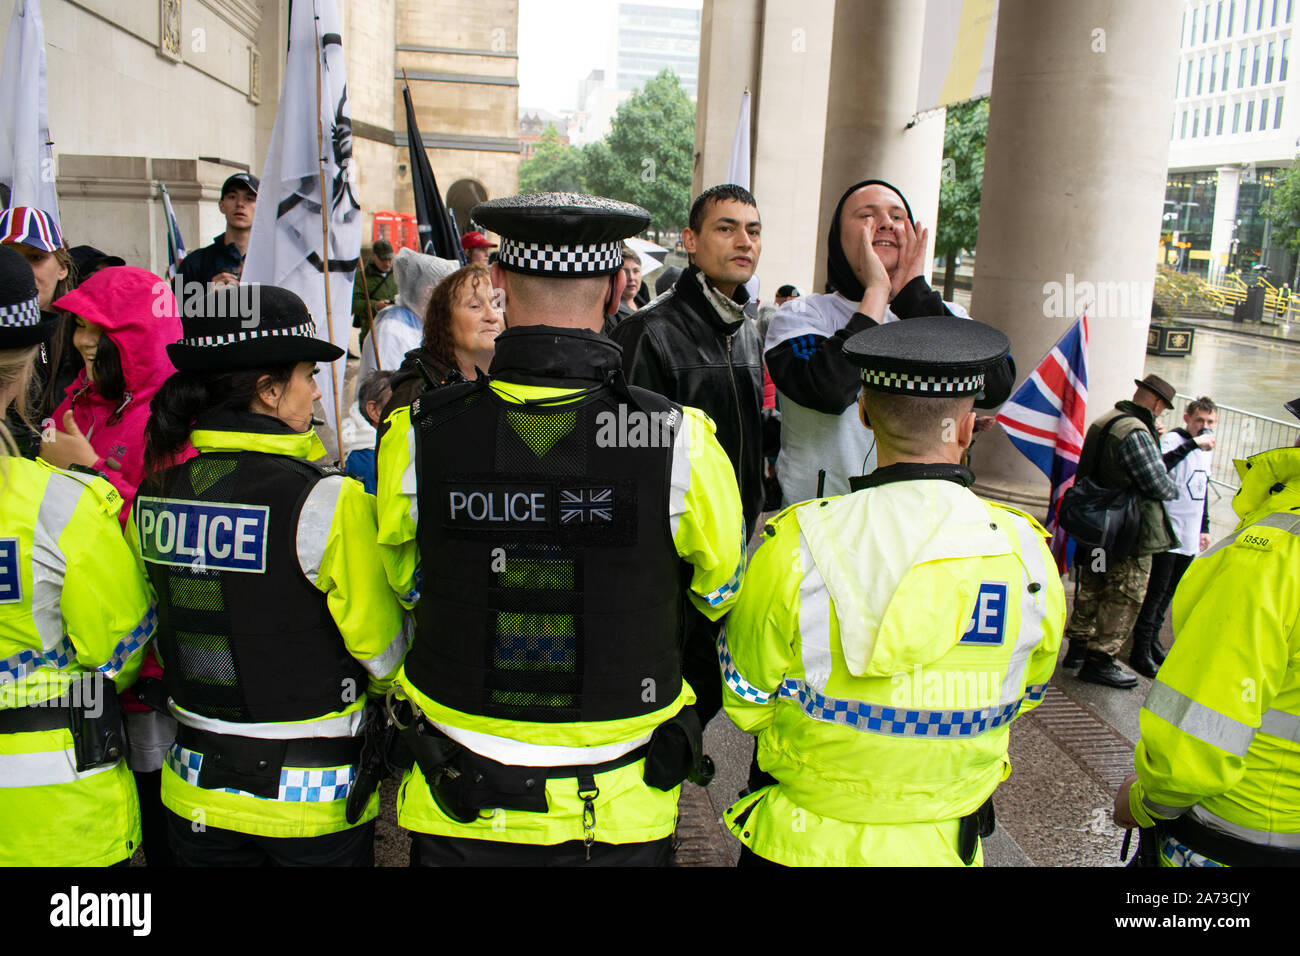 Pro Brexit protester at Conservative Party conference behind police line on steps in front of Manchester Central Library UK Stock Photo